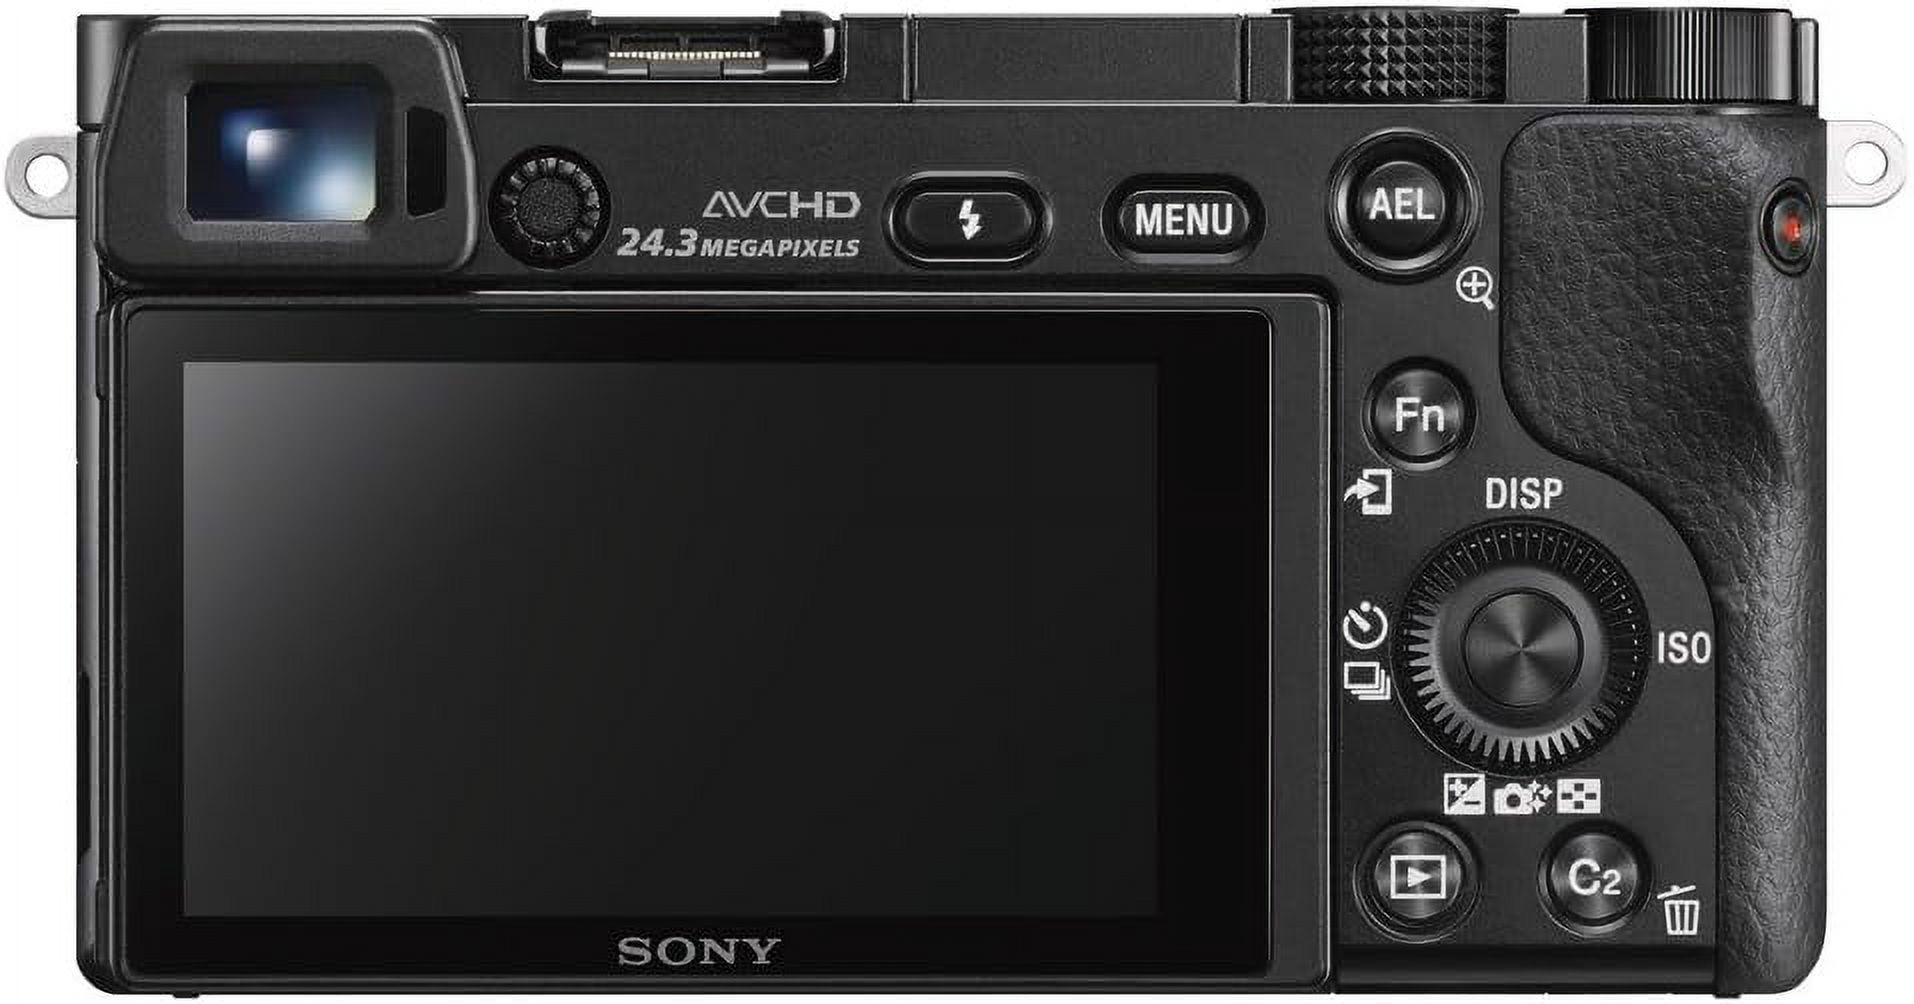 Sony Alpha a6000 Mirrorless Interchangeable-lens Camera - Black - image 2 of 2